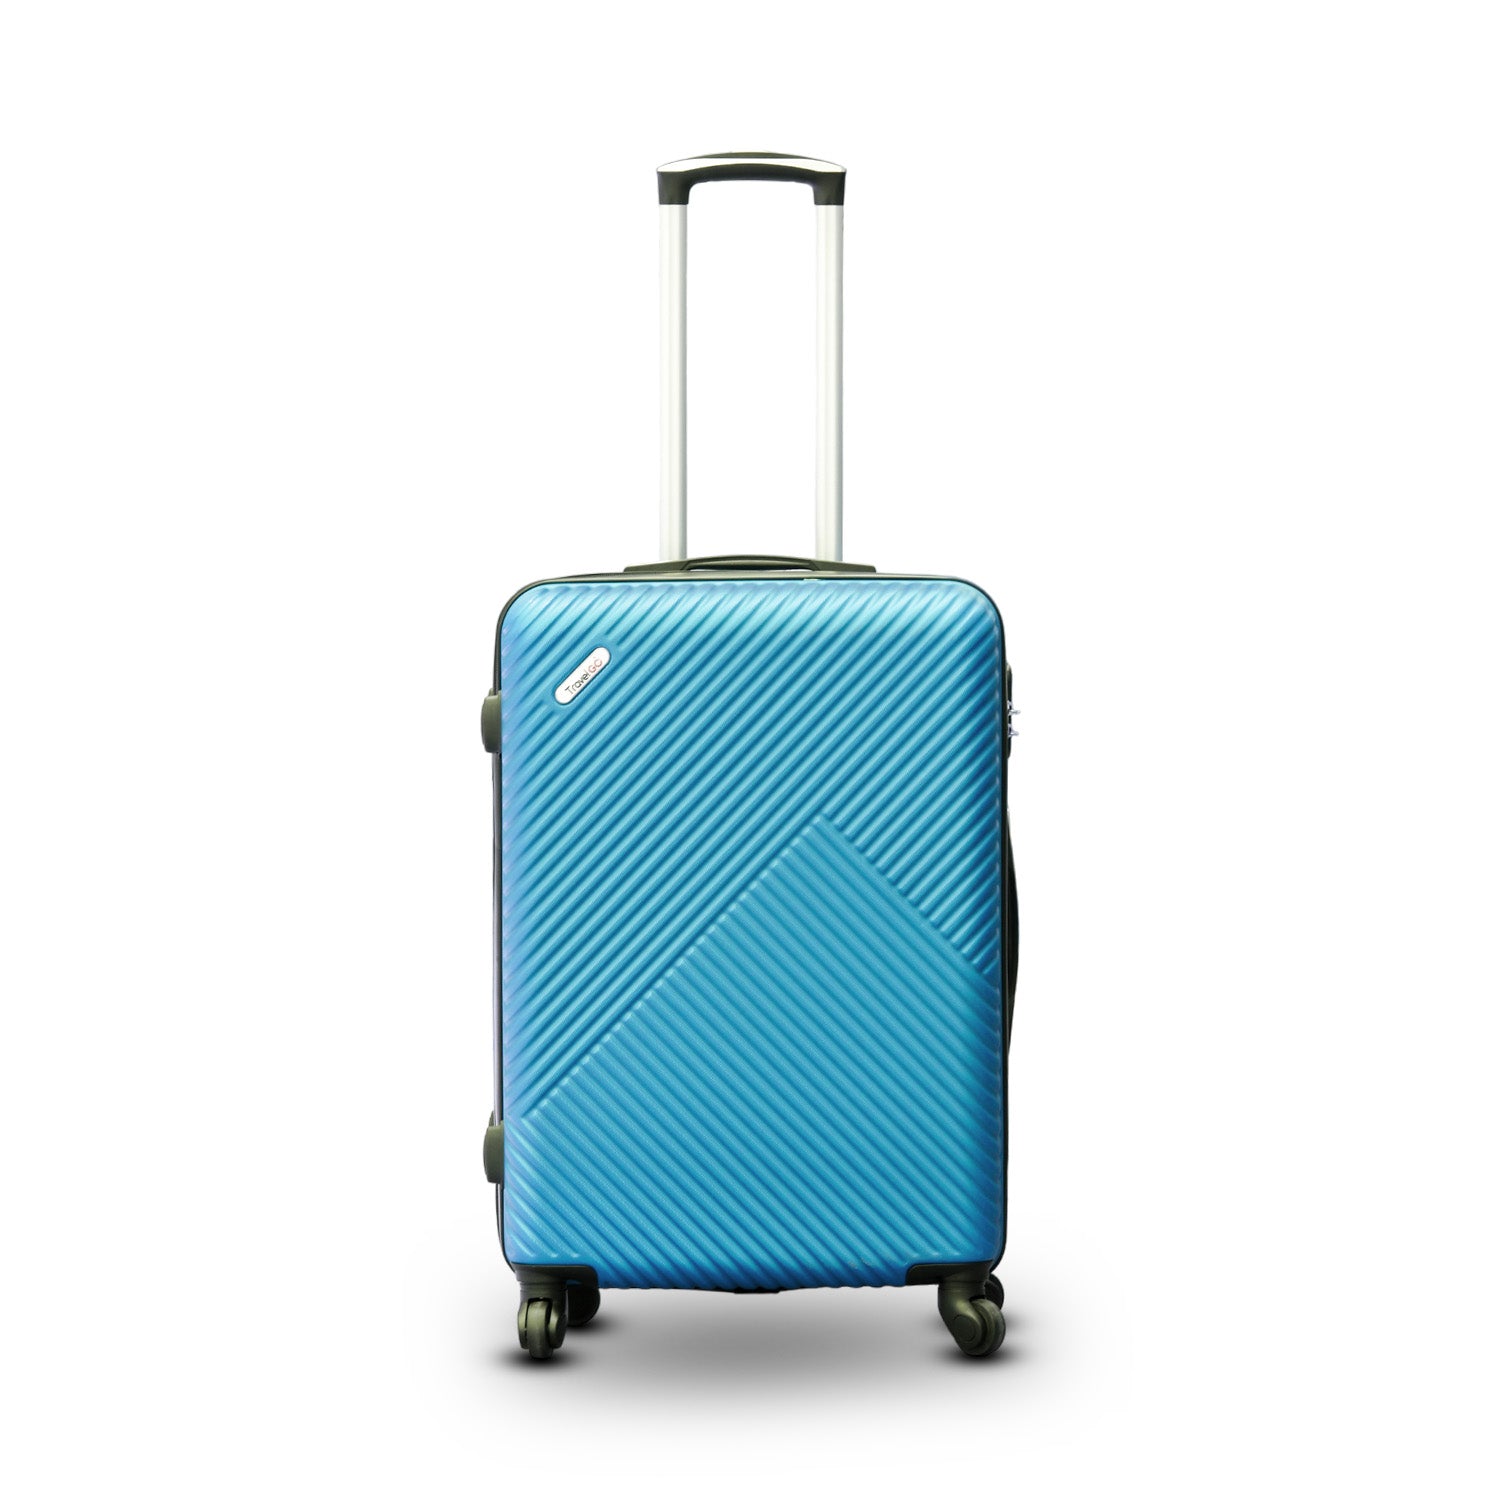 TravelGo Lightweight ABS Luggage Bags with Spinner Wheels | 20, 24, 28, 32 Inches